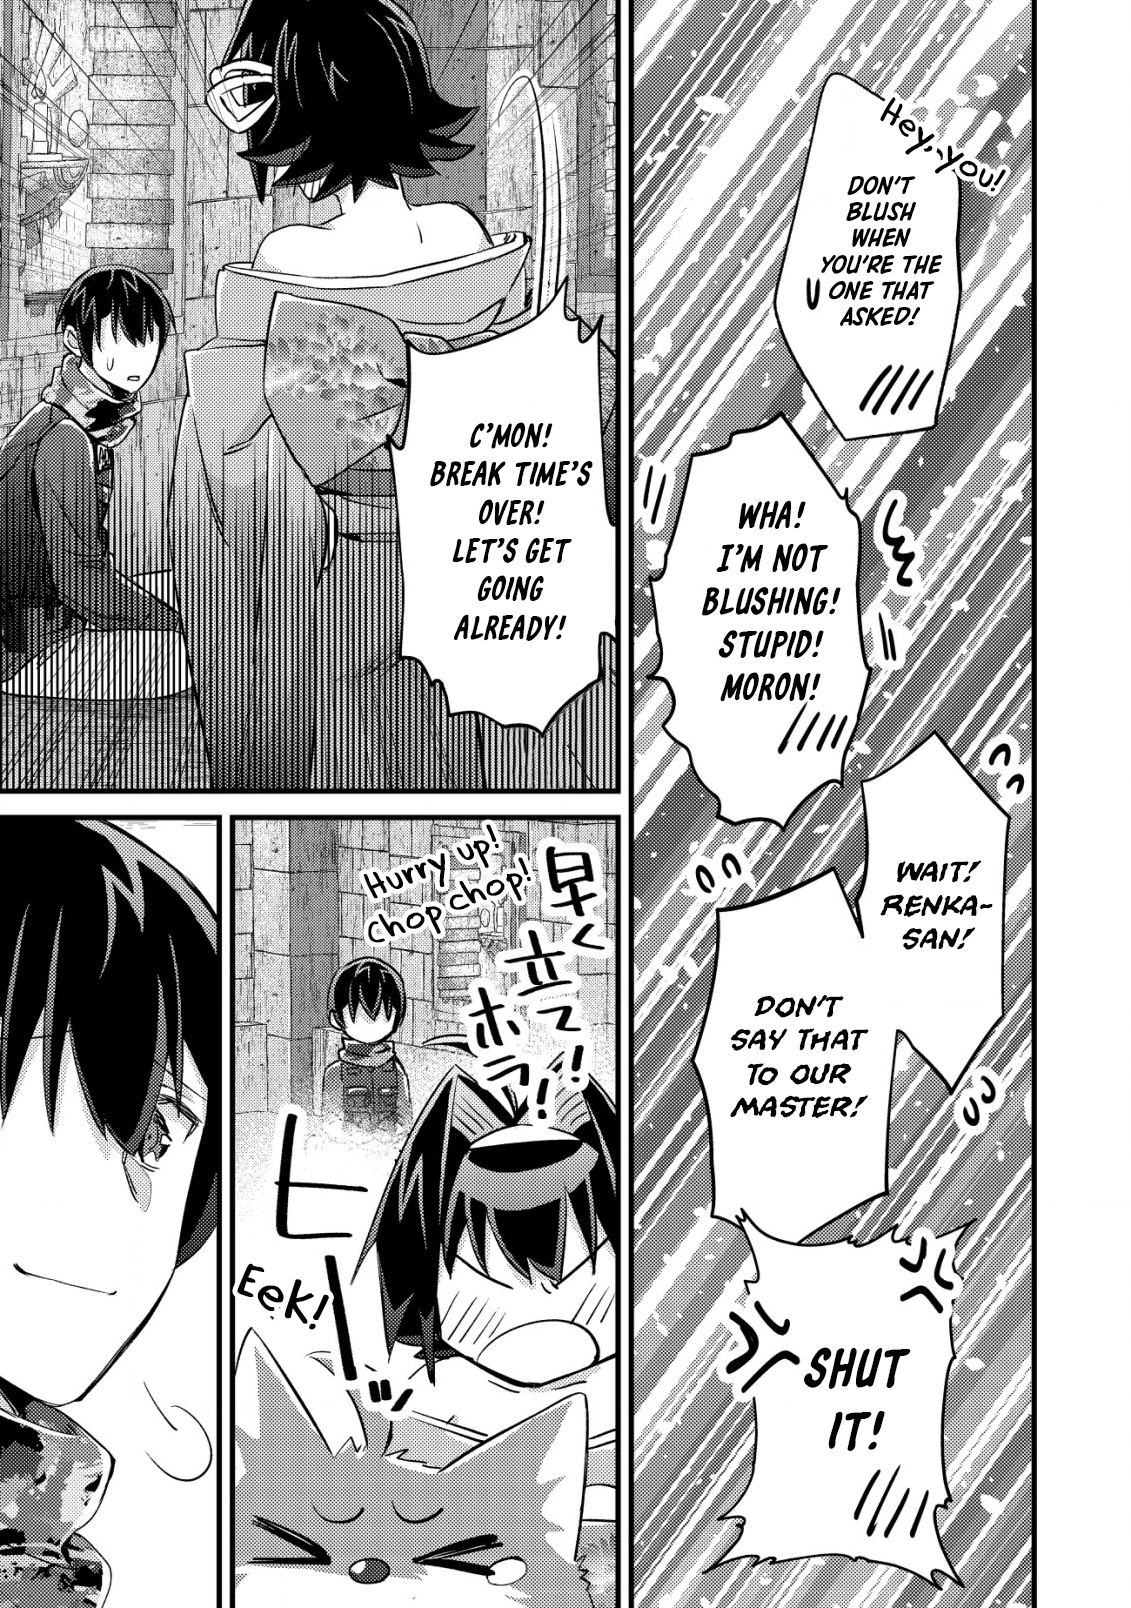 Can Even a Mob Highschooler Like Me Be a Normie If I Become an Adventurer? chapter 14.2 - page 12